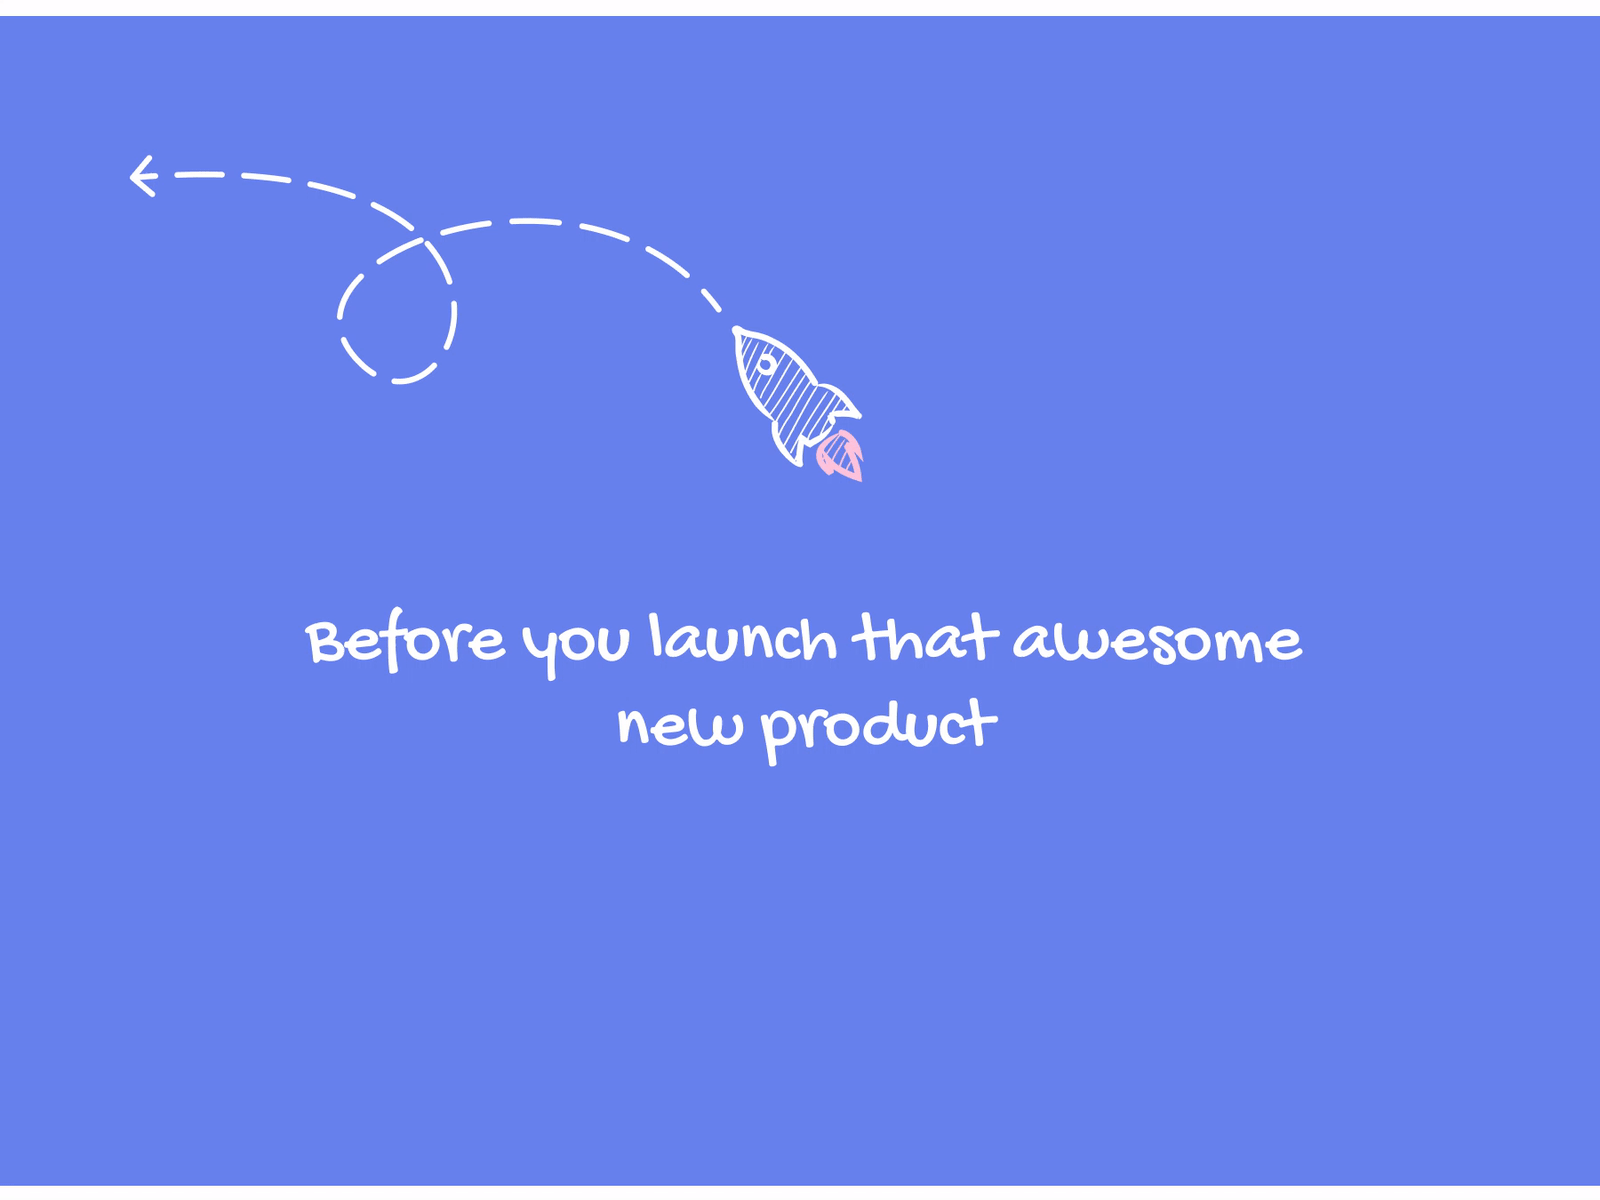 Before you launch that awesome new product